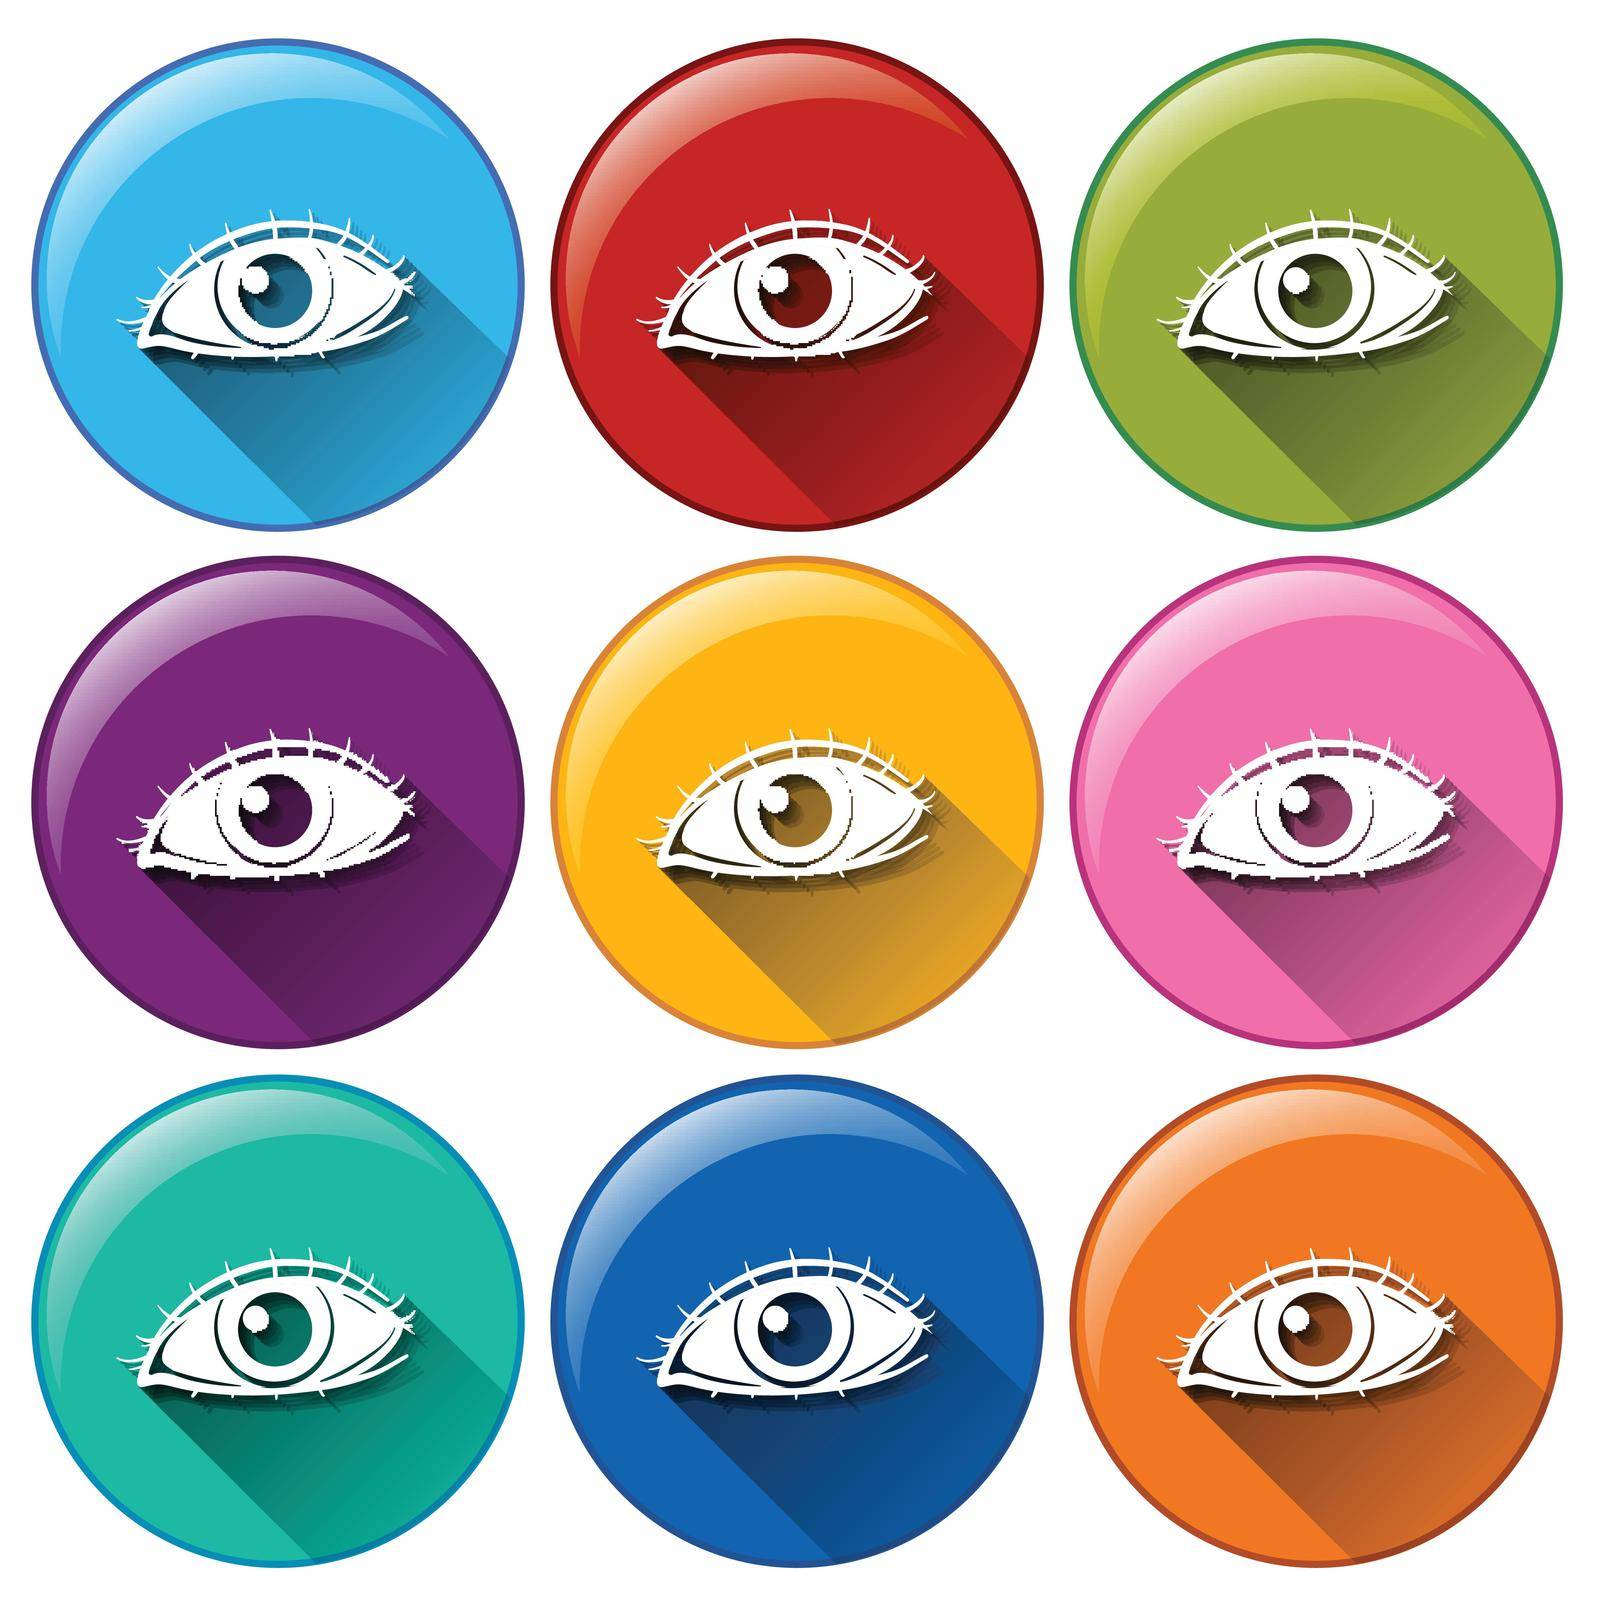 Round icons with eyes by iimages